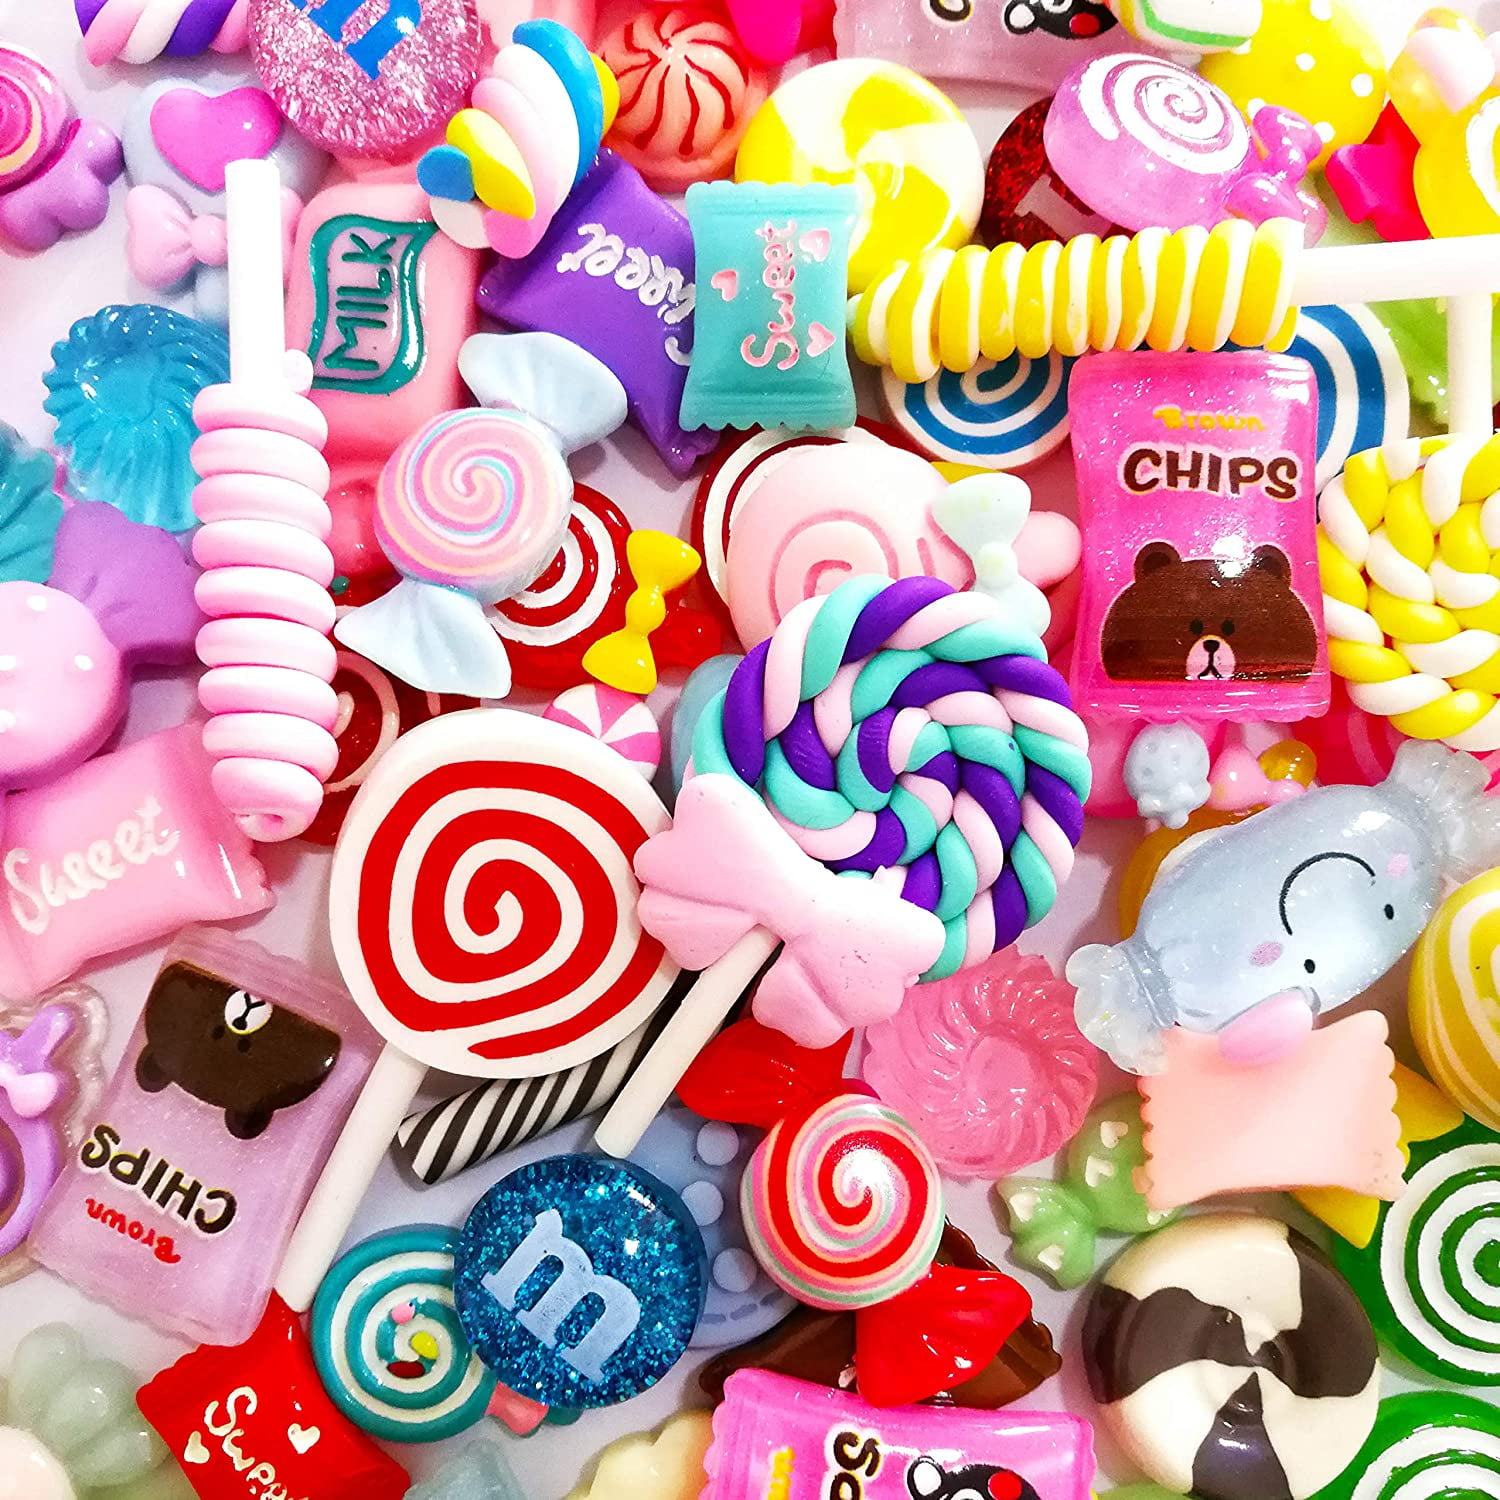 100 Pieces Slime Charms Cute Set Mixed Candy Sweets Resin Charms Lollipop Resin Flatback Slime Beads Making Supplies Assorted Kawaii Candy Ornaments for Scrapbooking DIY Crafts 10 Styles 